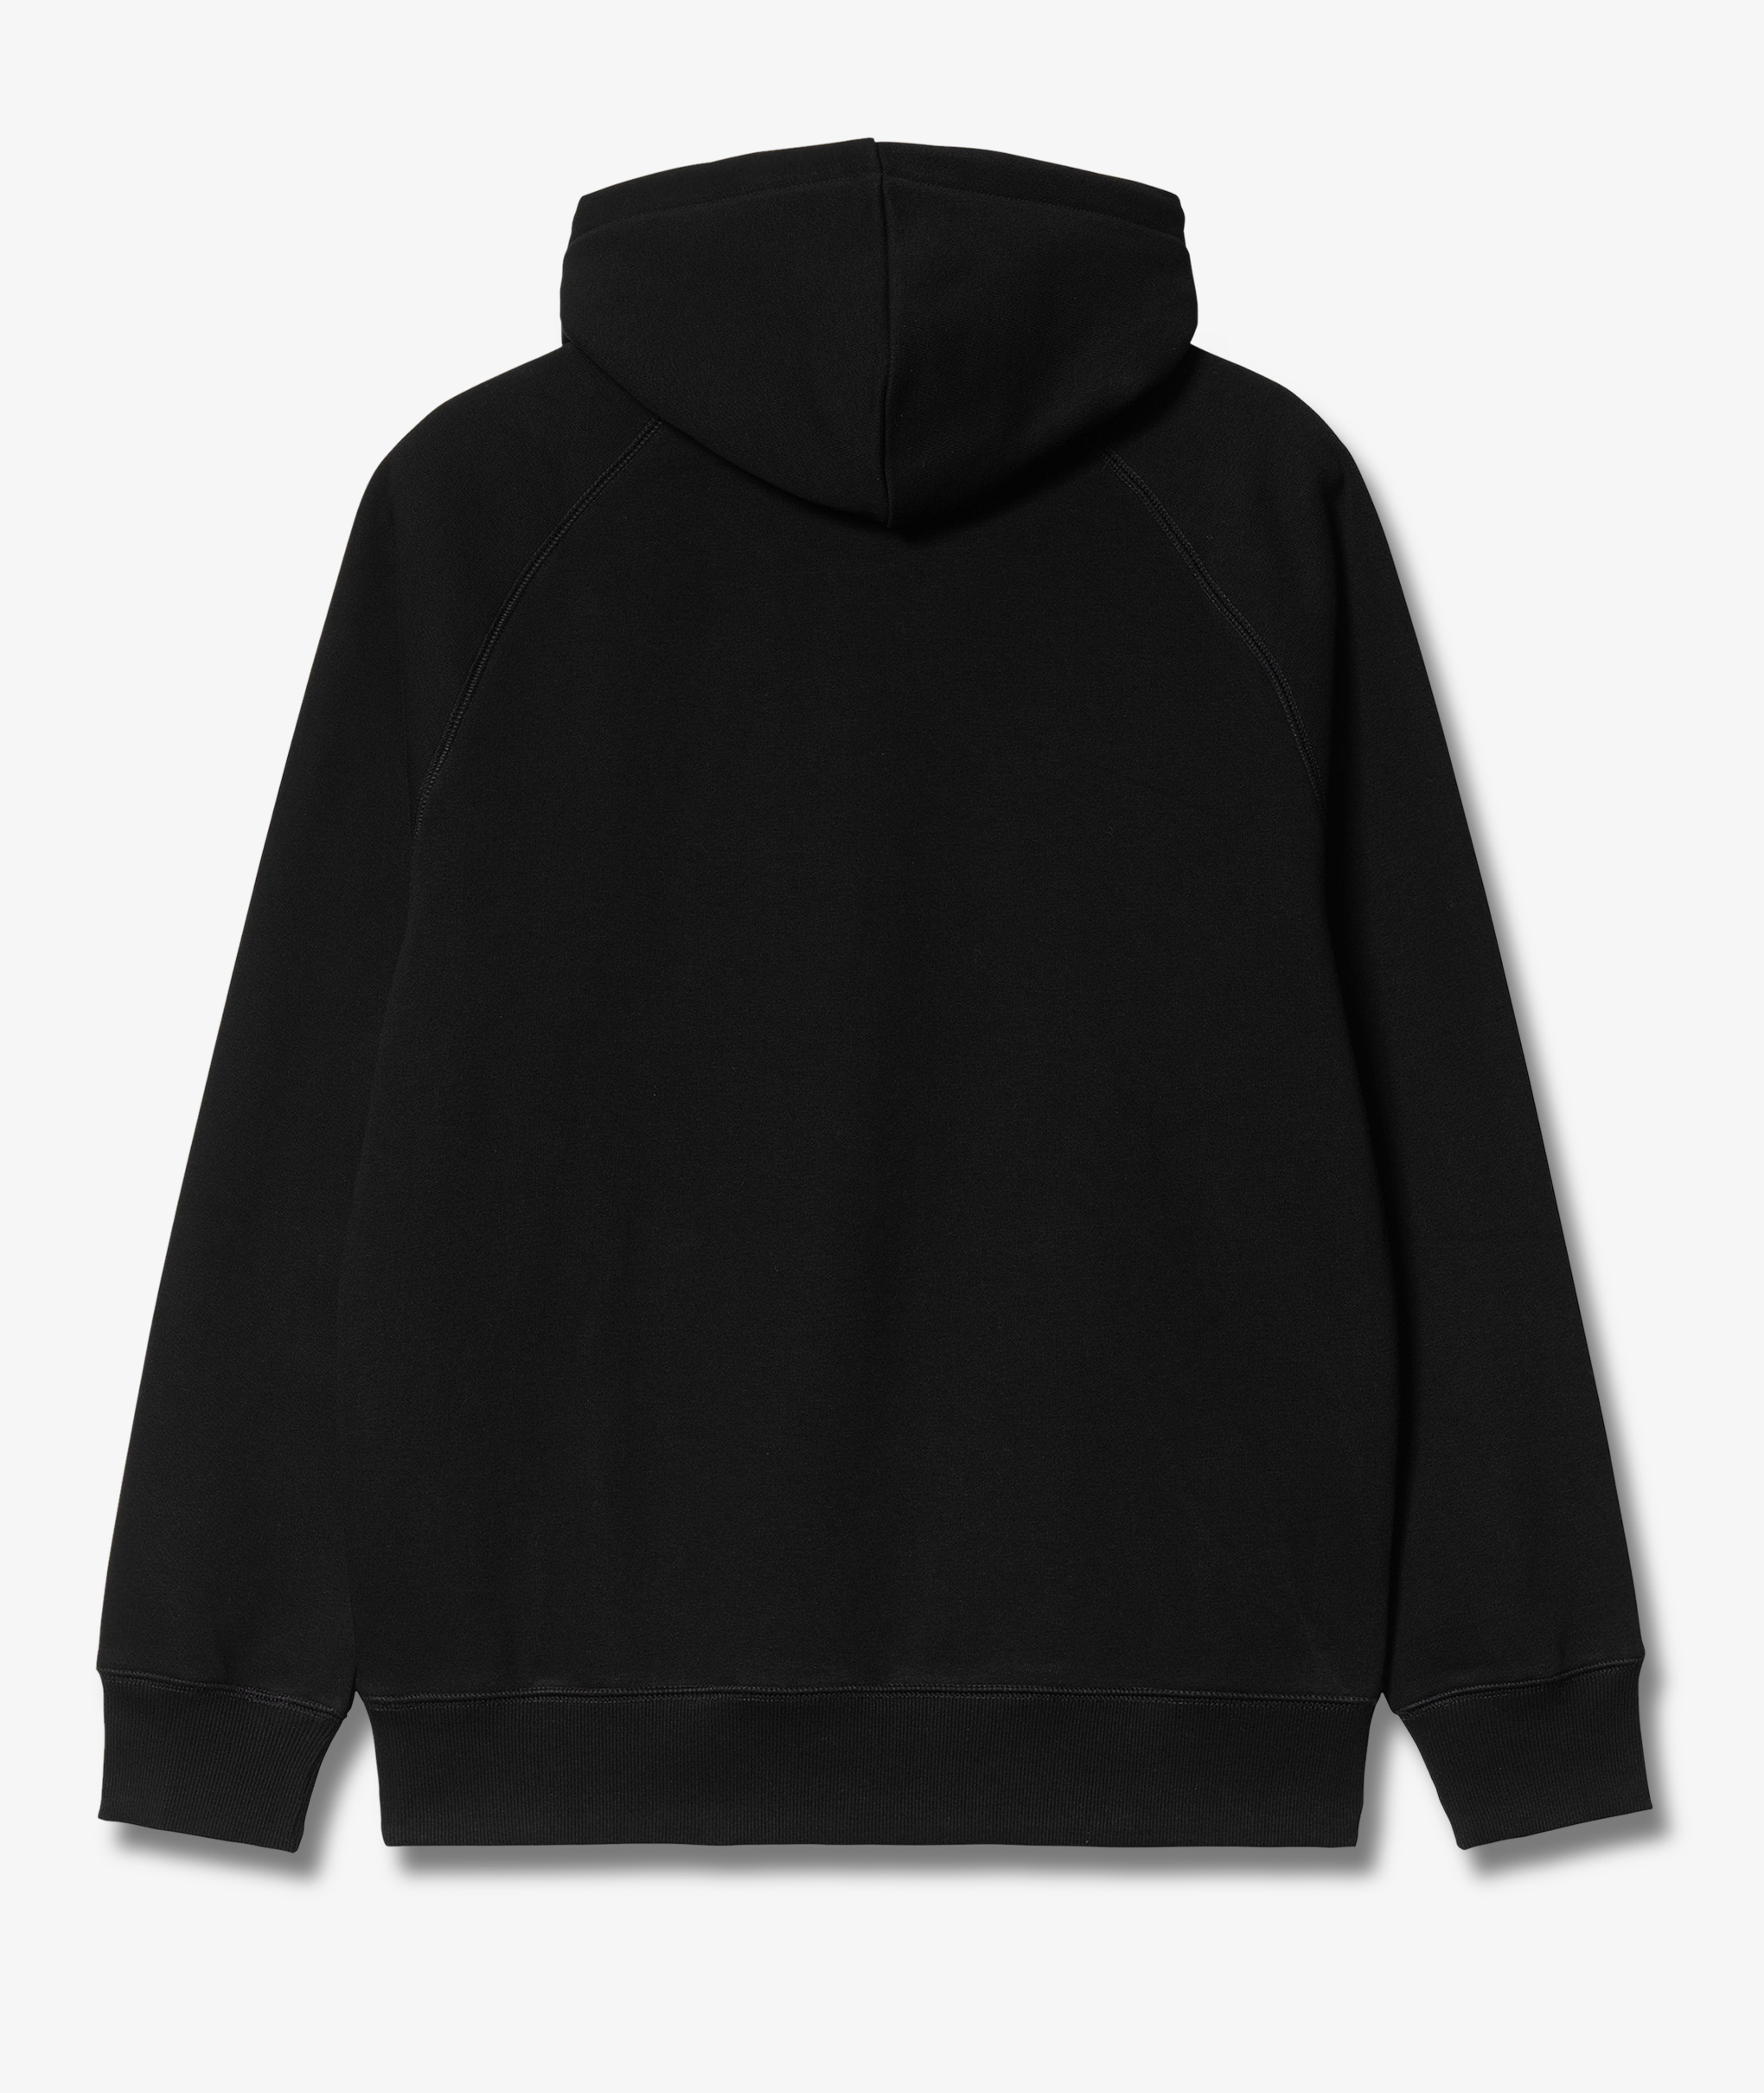 Norse Store | Shipping Worldwide - Carhartt WIP Hooded Chase Sweat ...